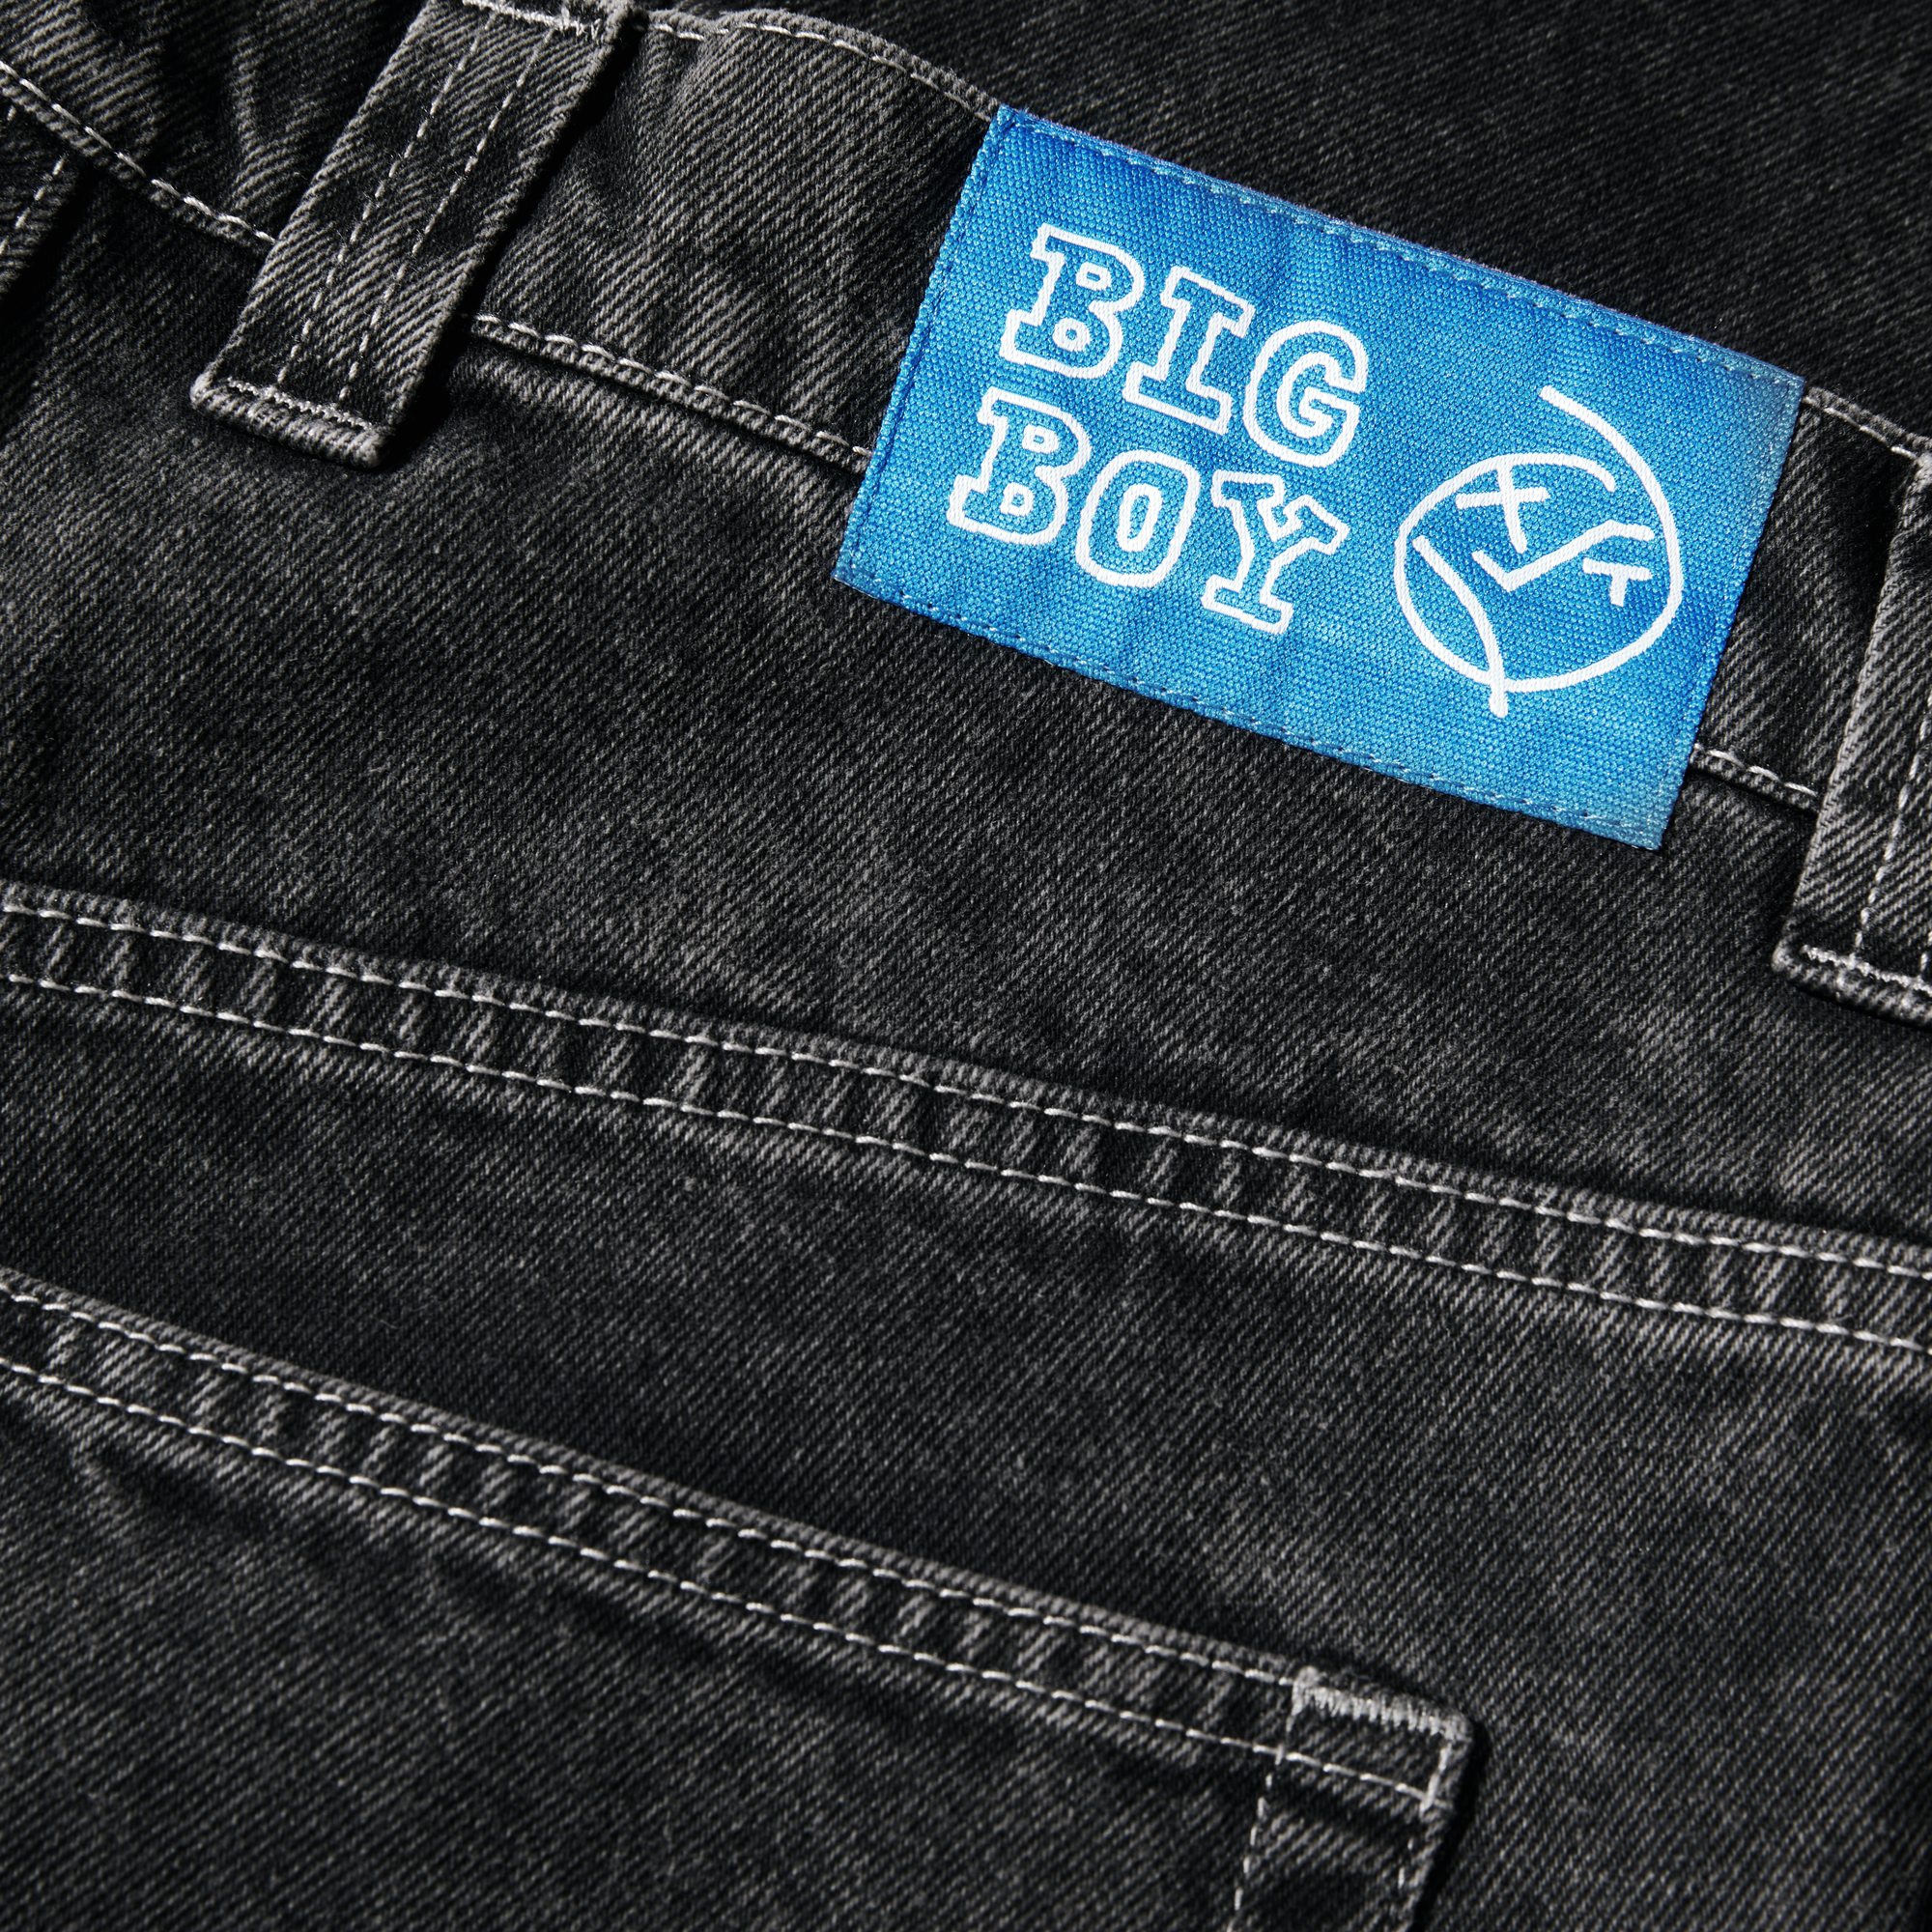 Black polar big boy denim baggy jeans with silver contrast stitching and a blue  tab on back. Free uk shipping on orders over £50